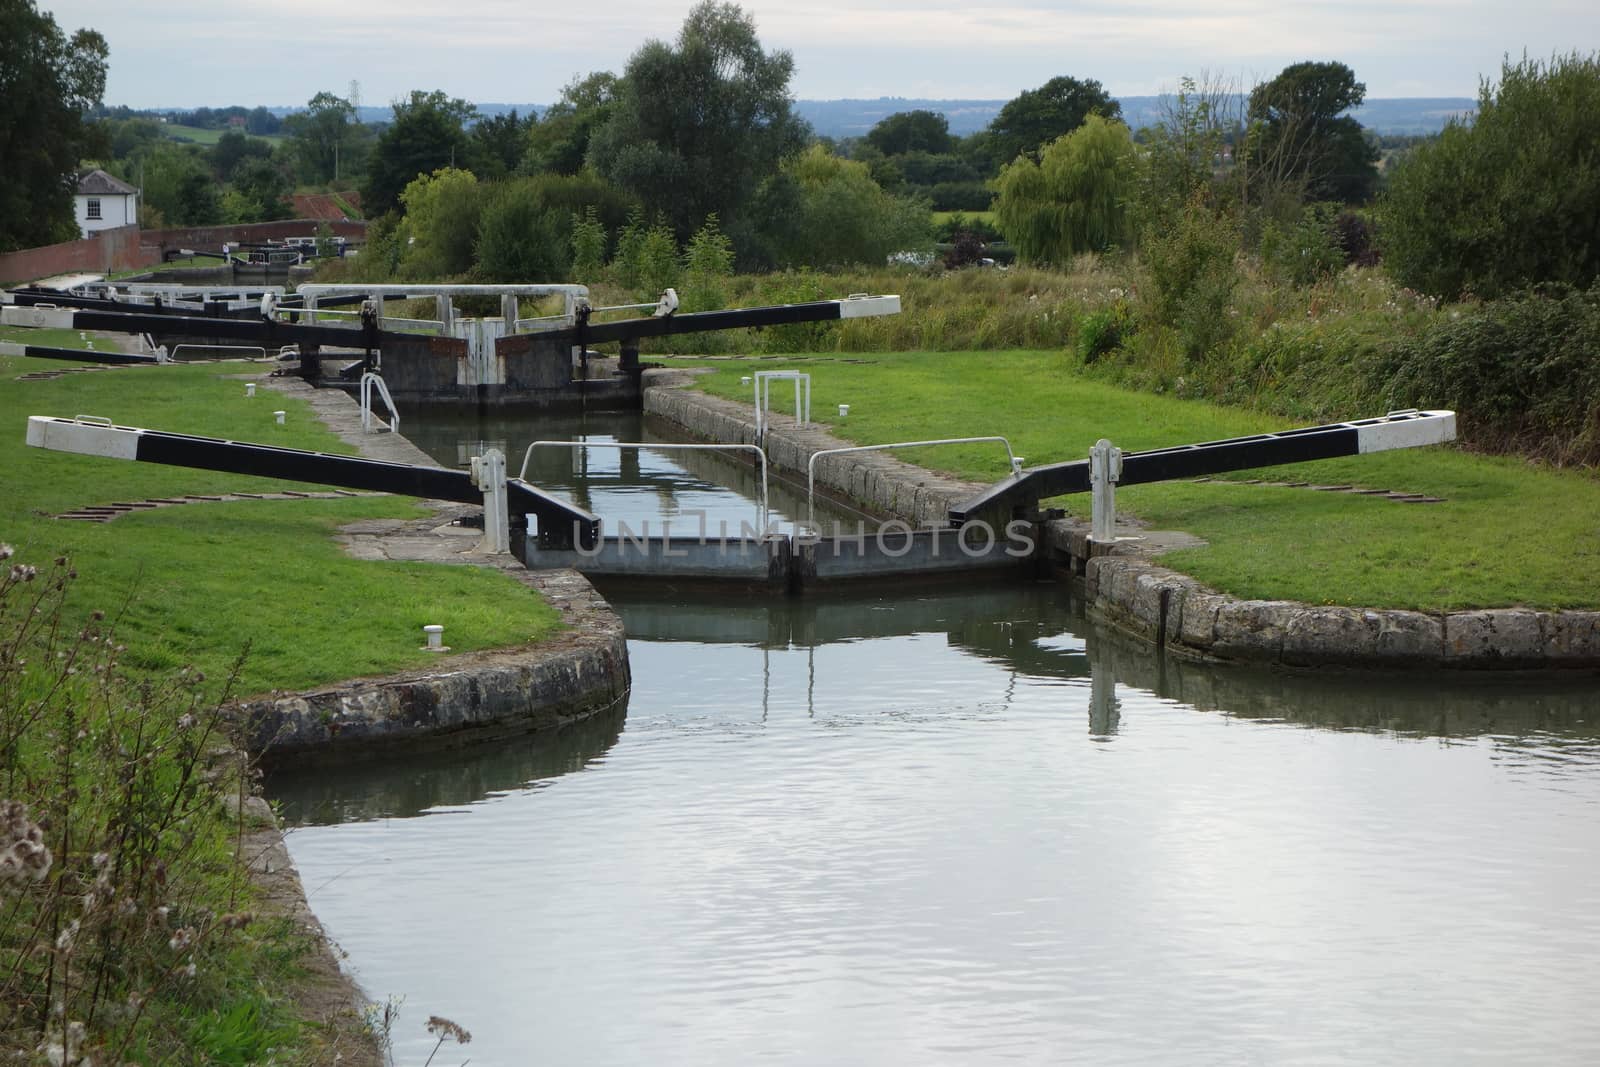 Some of the twenty-nine Caen Hill Locks on the Kennet and Avon canal